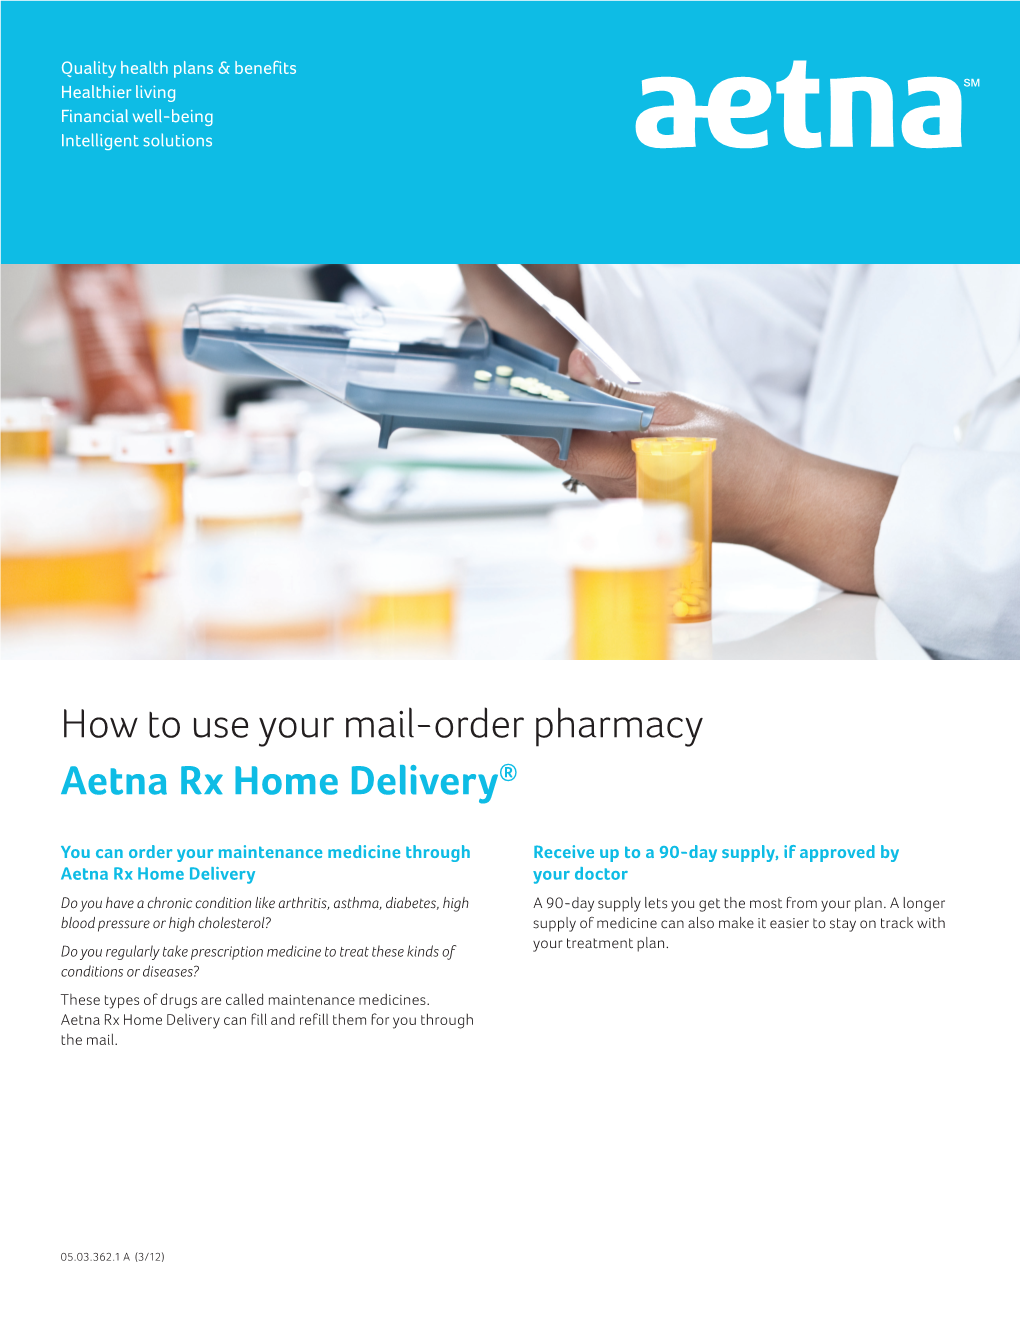 How to Use Your Mail-Order Pharmacy Aetna Rx Home Delivery®